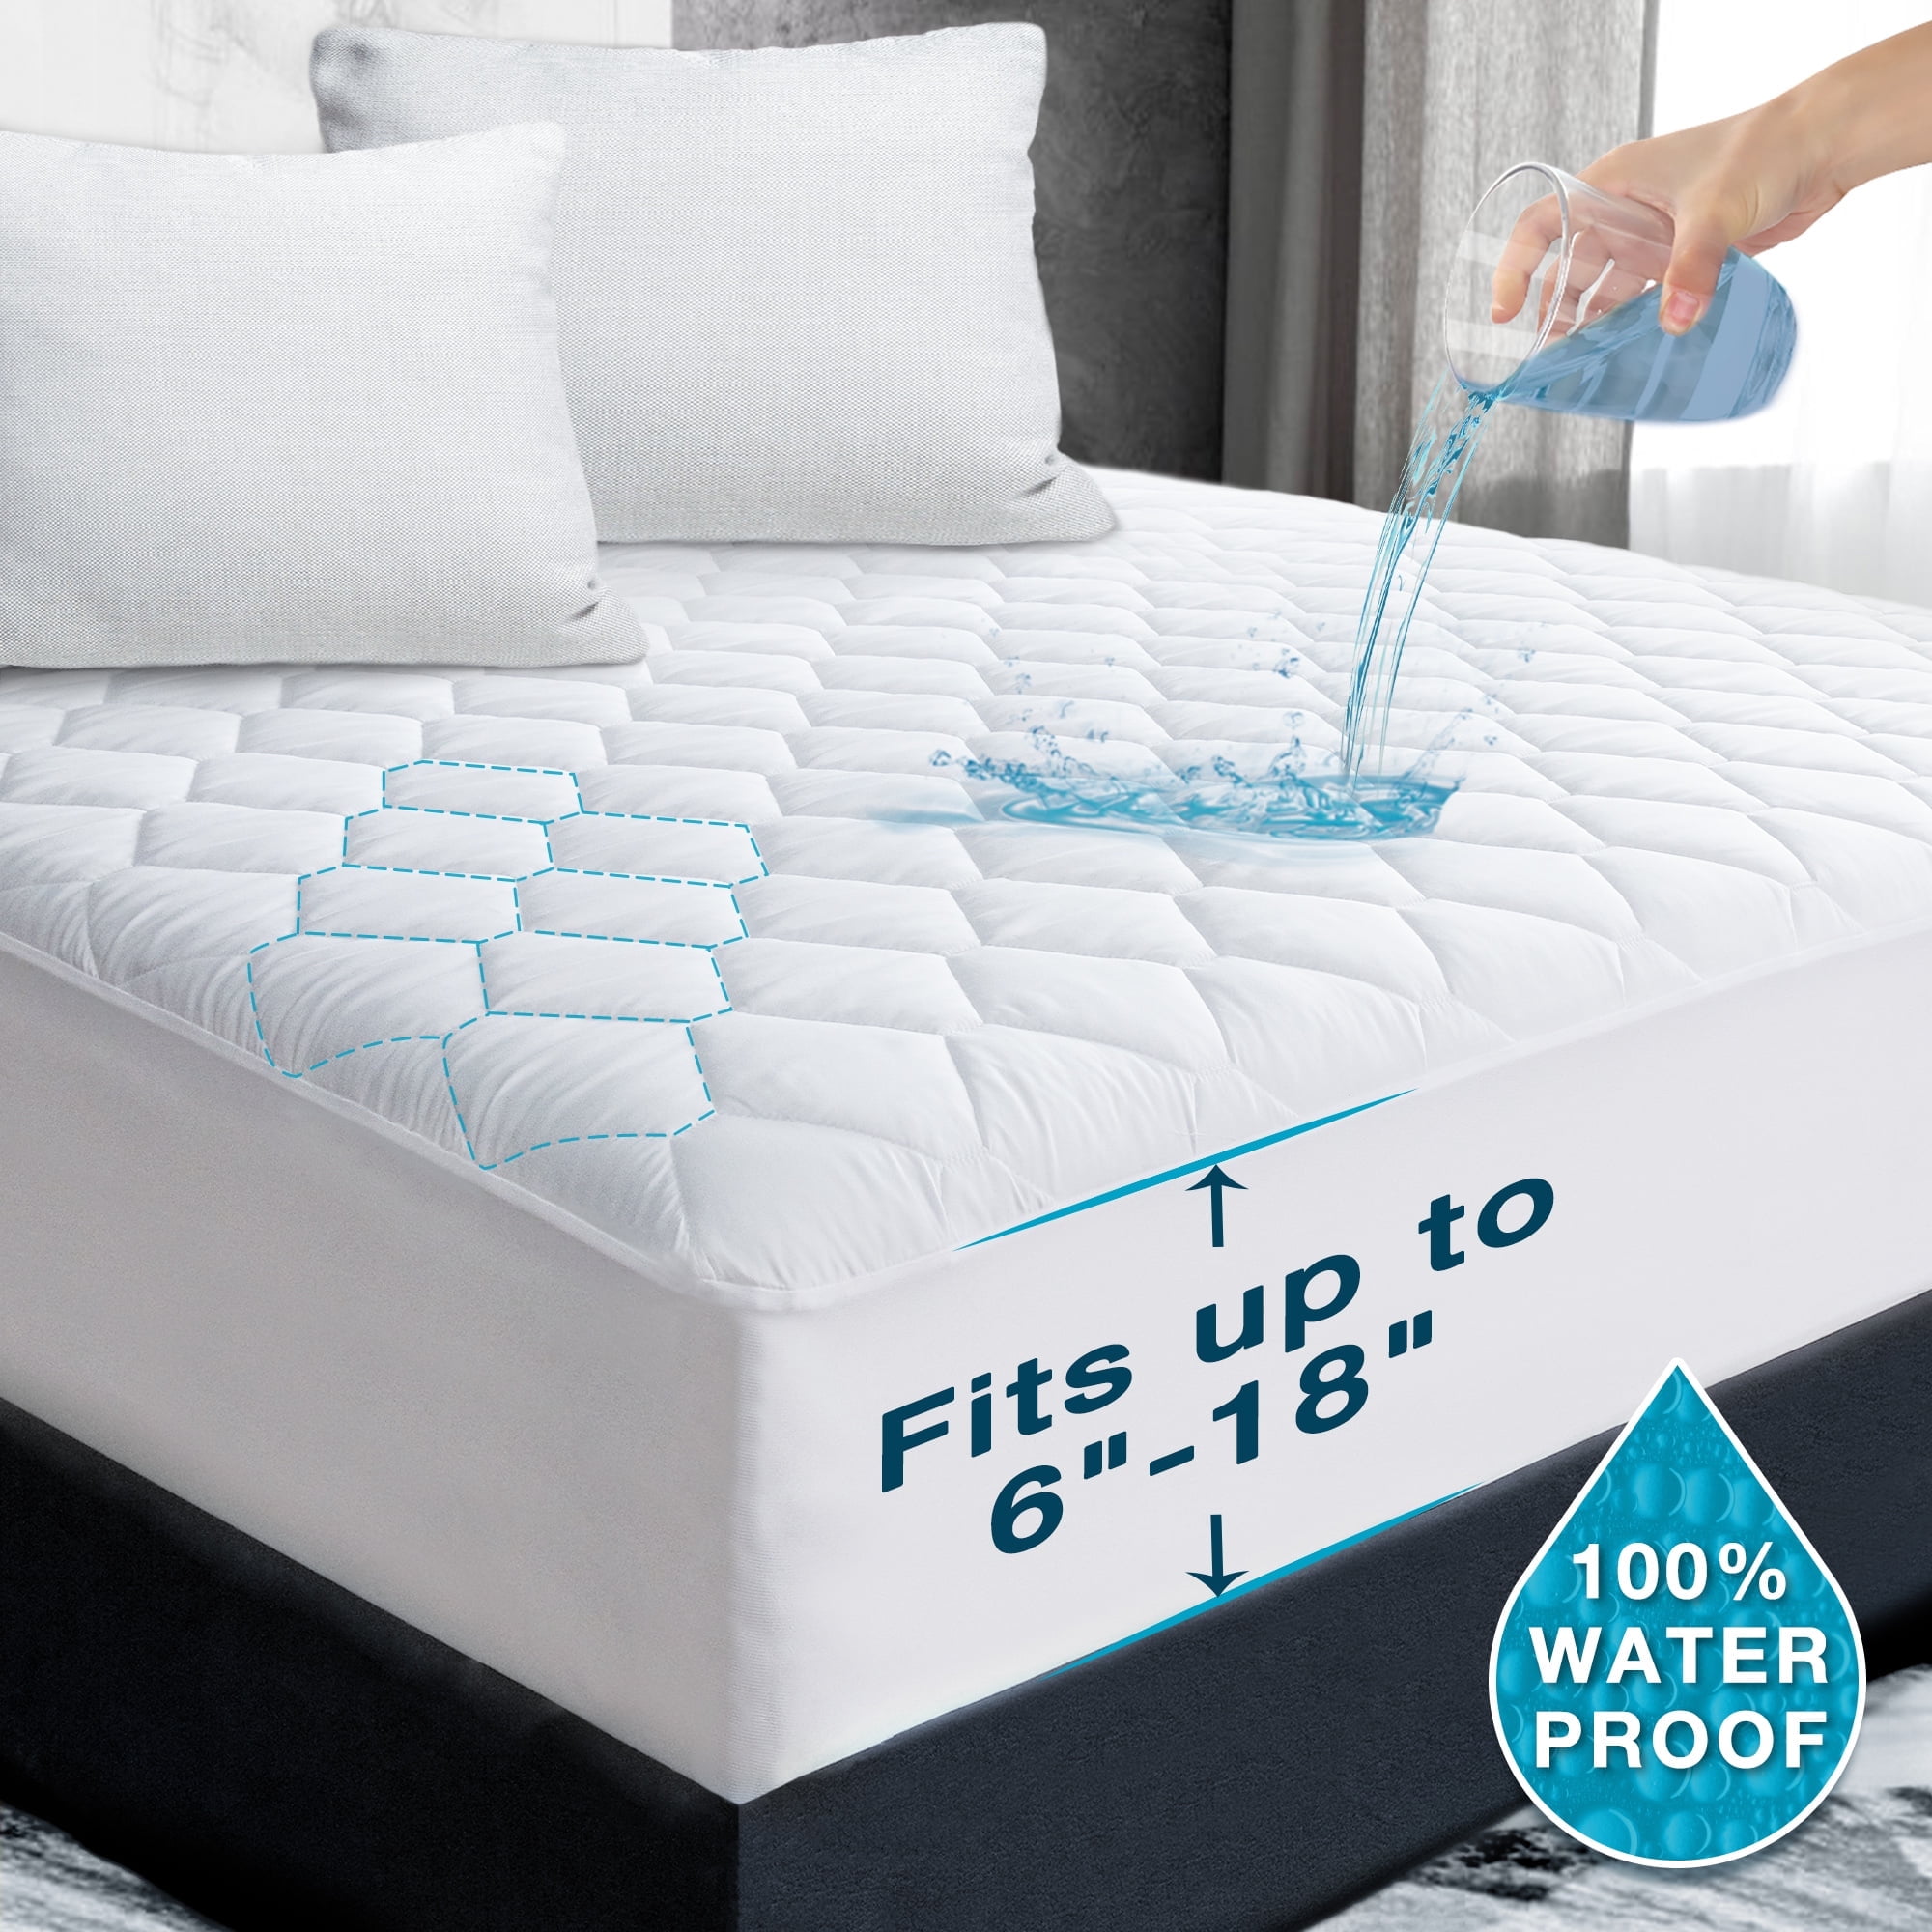 Nevlers King Size Slip Resistant Mattress Pad | Prevents Mattress & Topper from Sliding | 72 inch x 72 inch | Multi-Purpose & Customizable, Size: 6' x